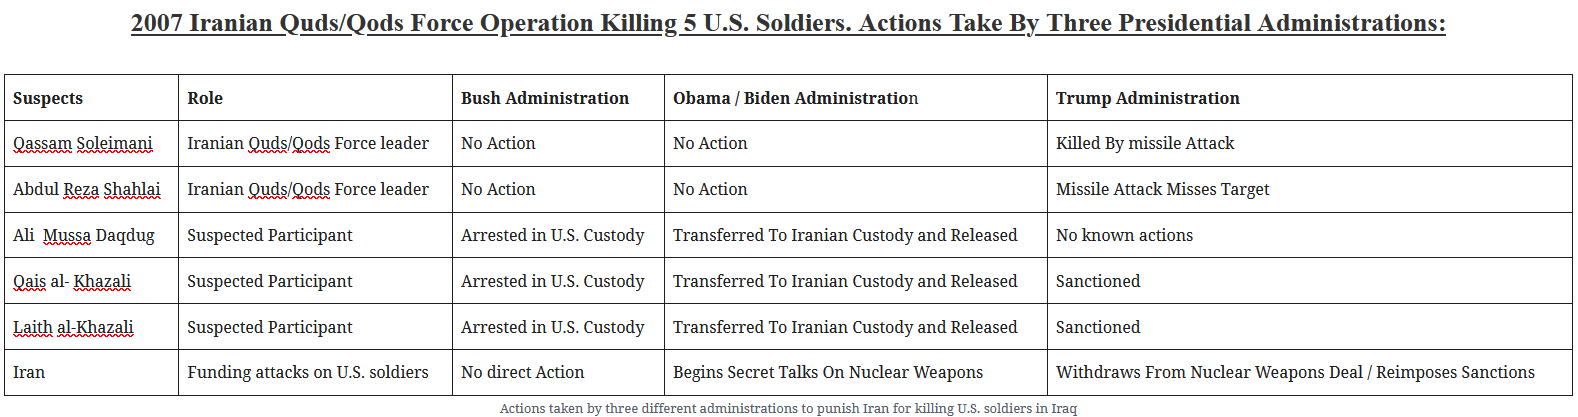 Trump punished Iran for attacking U.S. soldiers. Obama/Biden freed Iranian killers of U.S. soldiers.